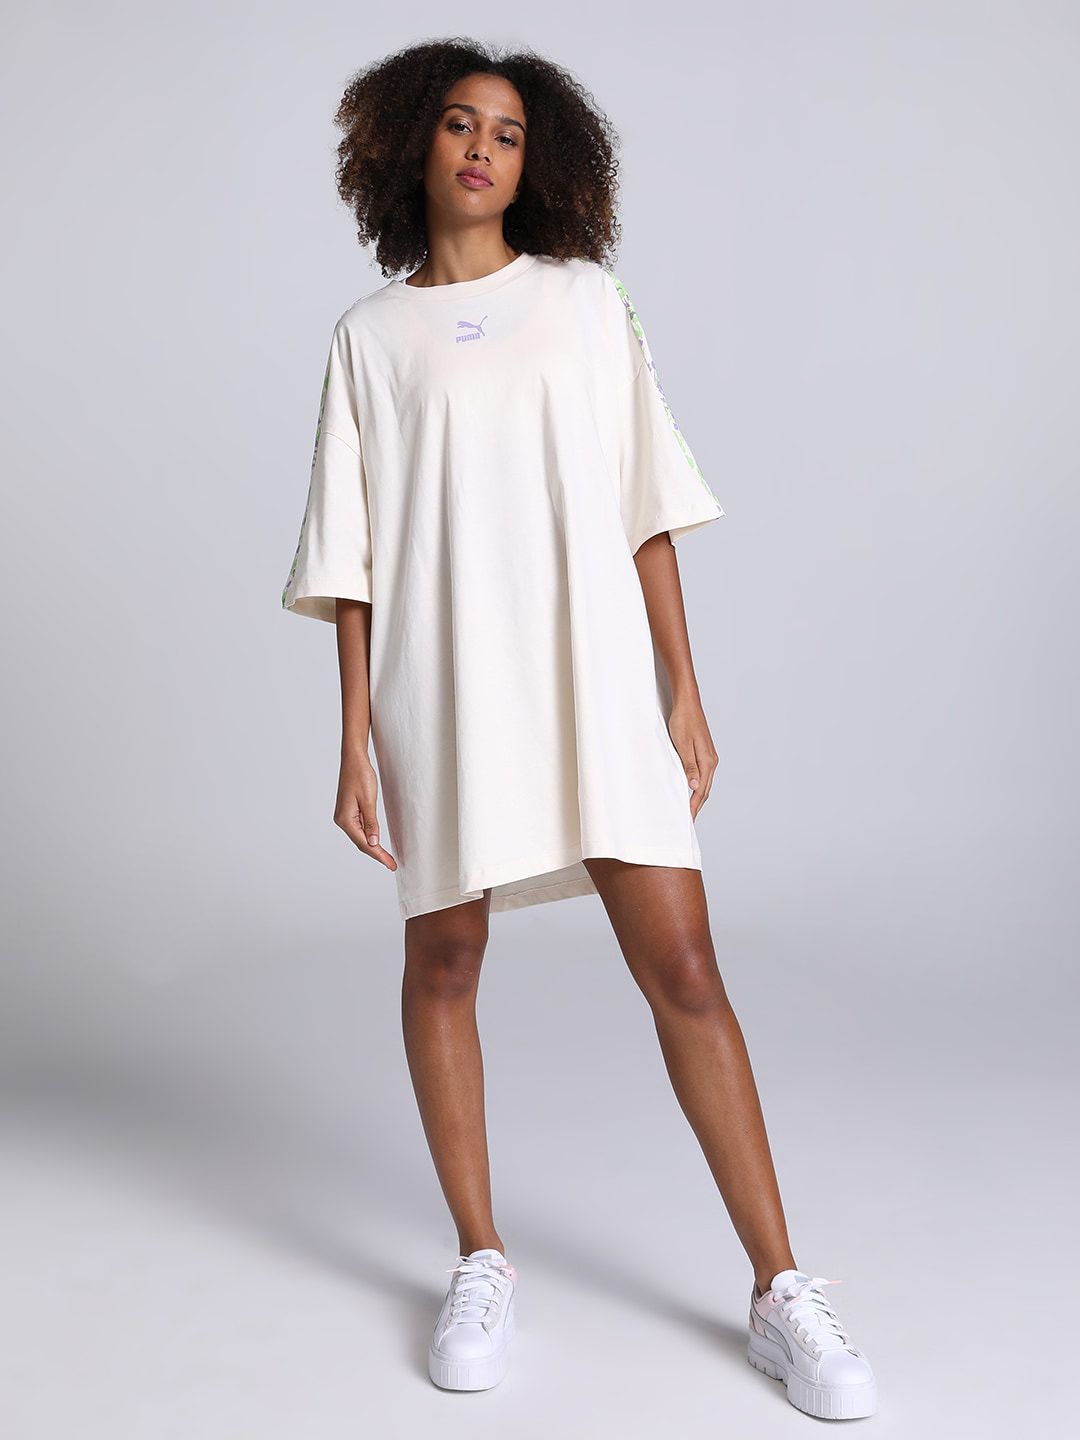 Puma Extended Sleeves Cotton T-Shirt Dress Price in India